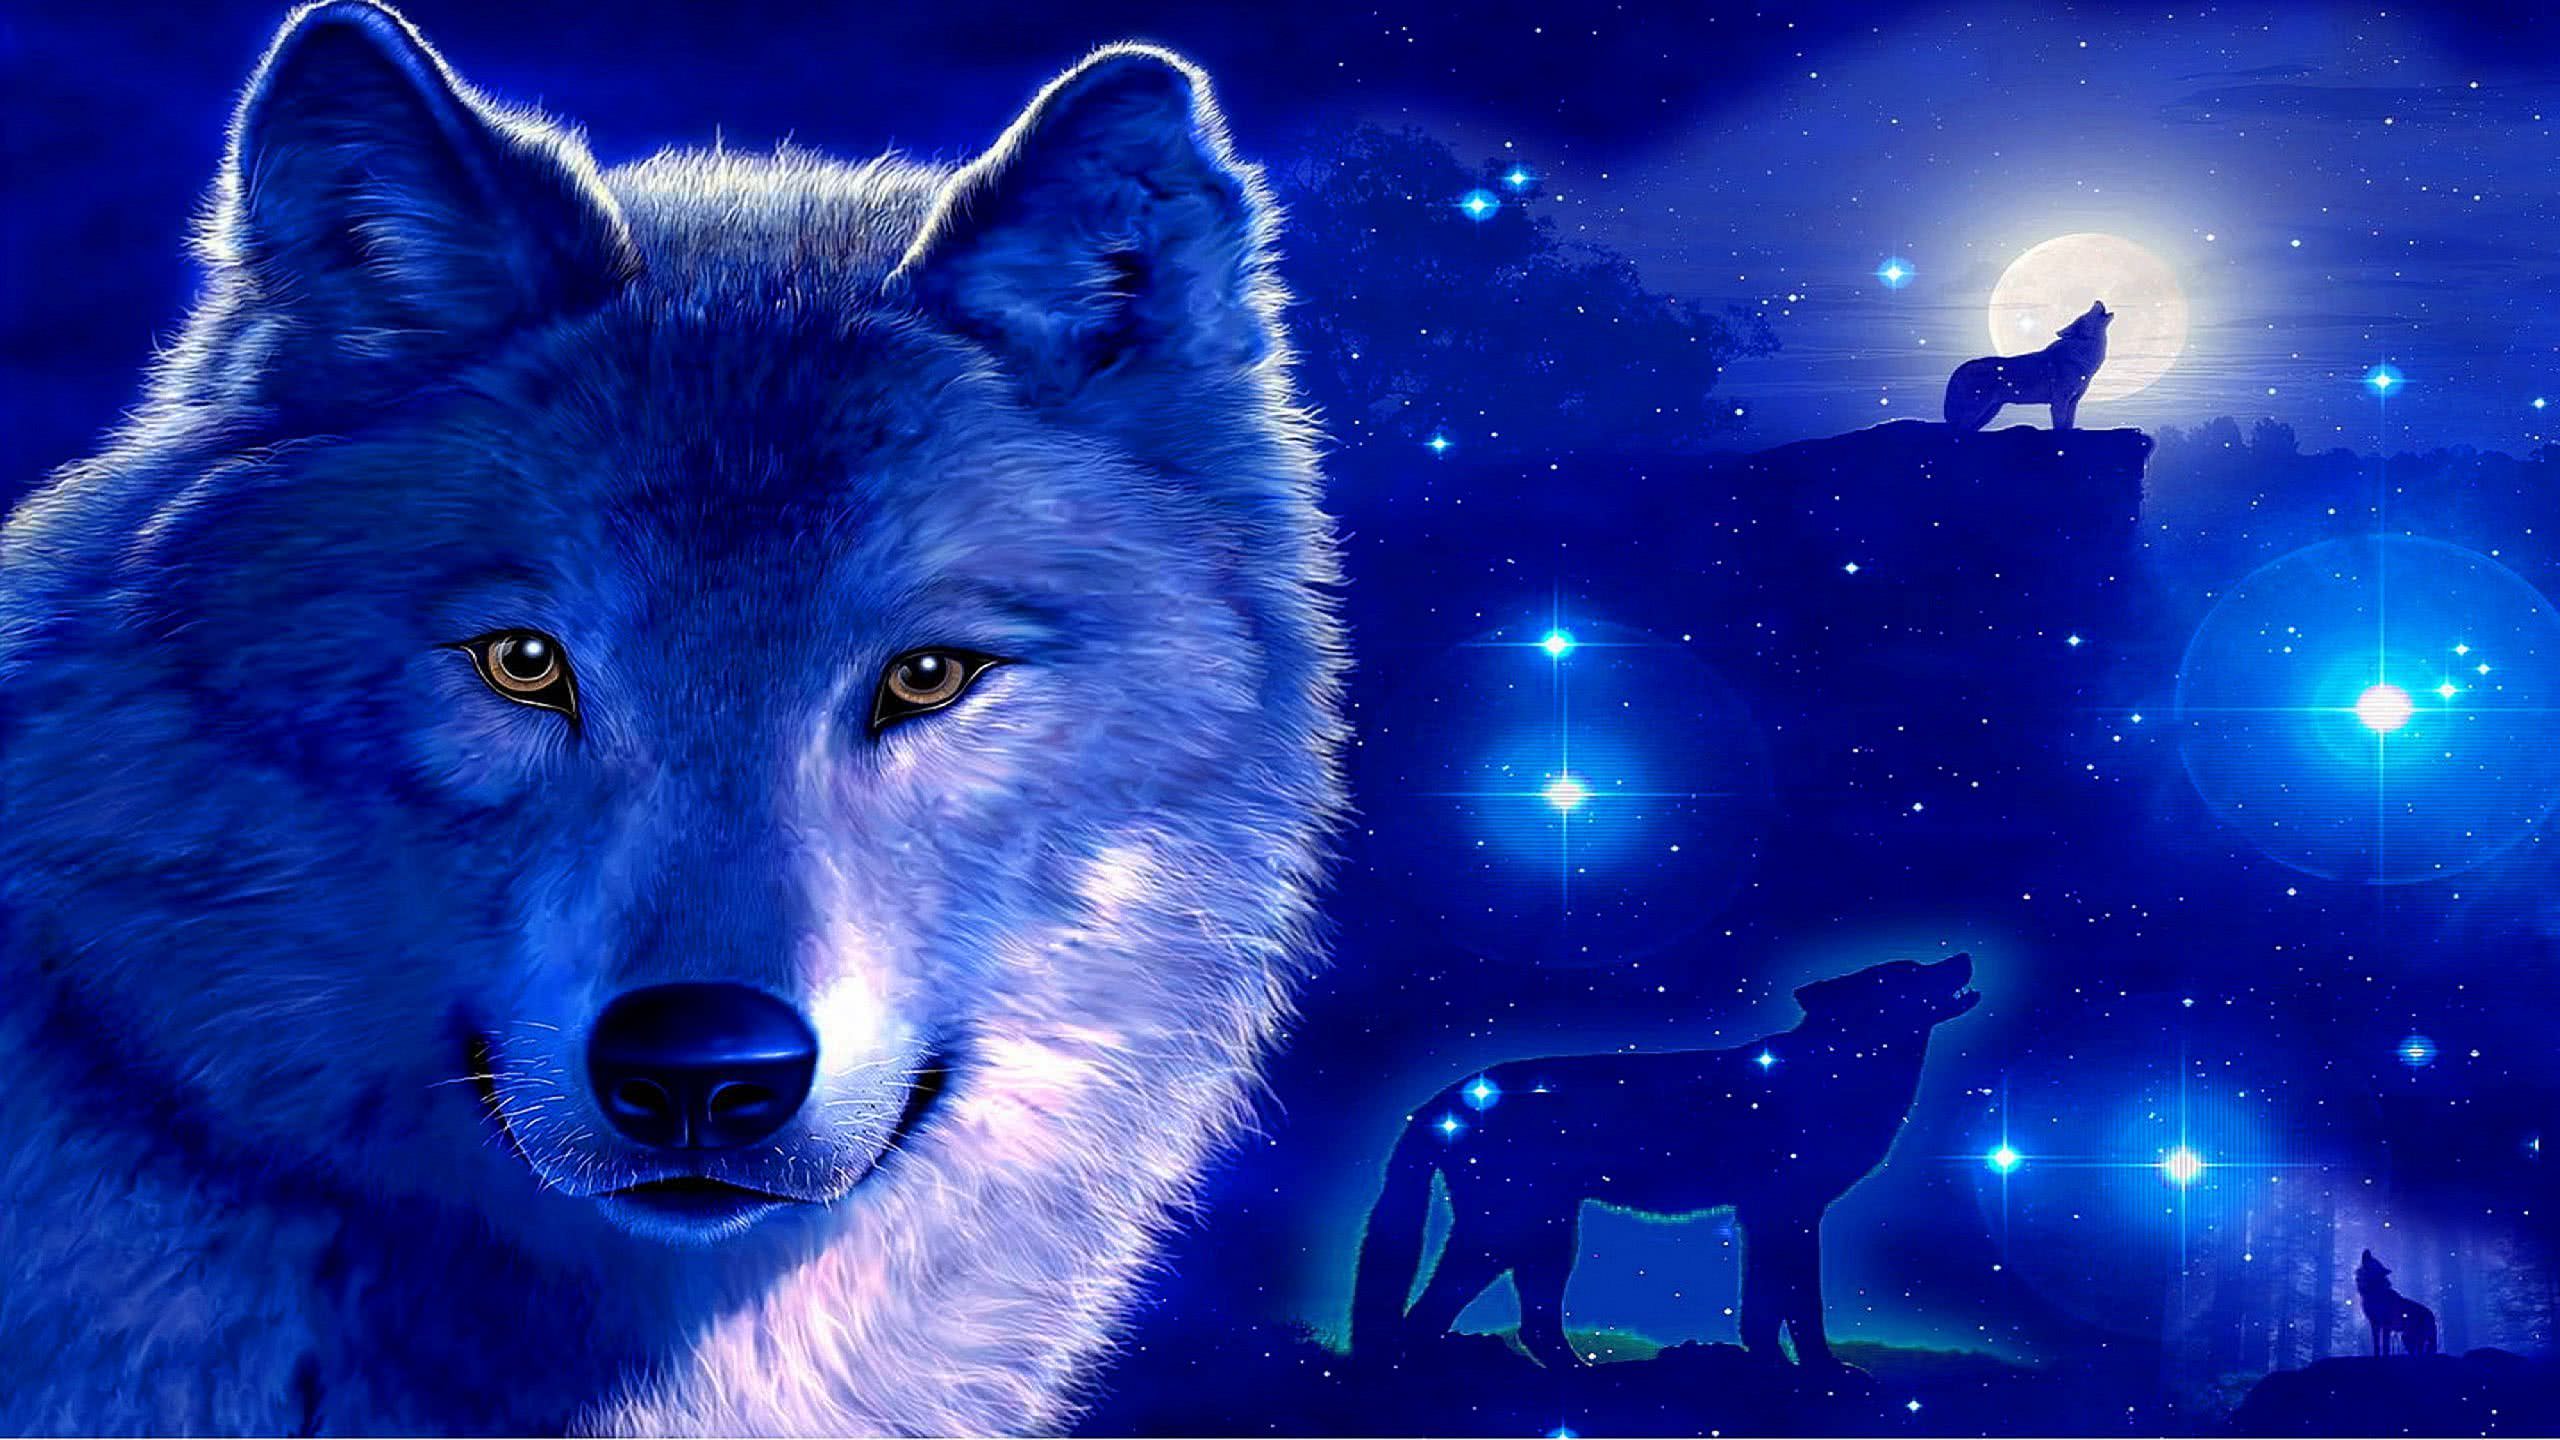 Cool Blue Wolf Wallpaper Image 35